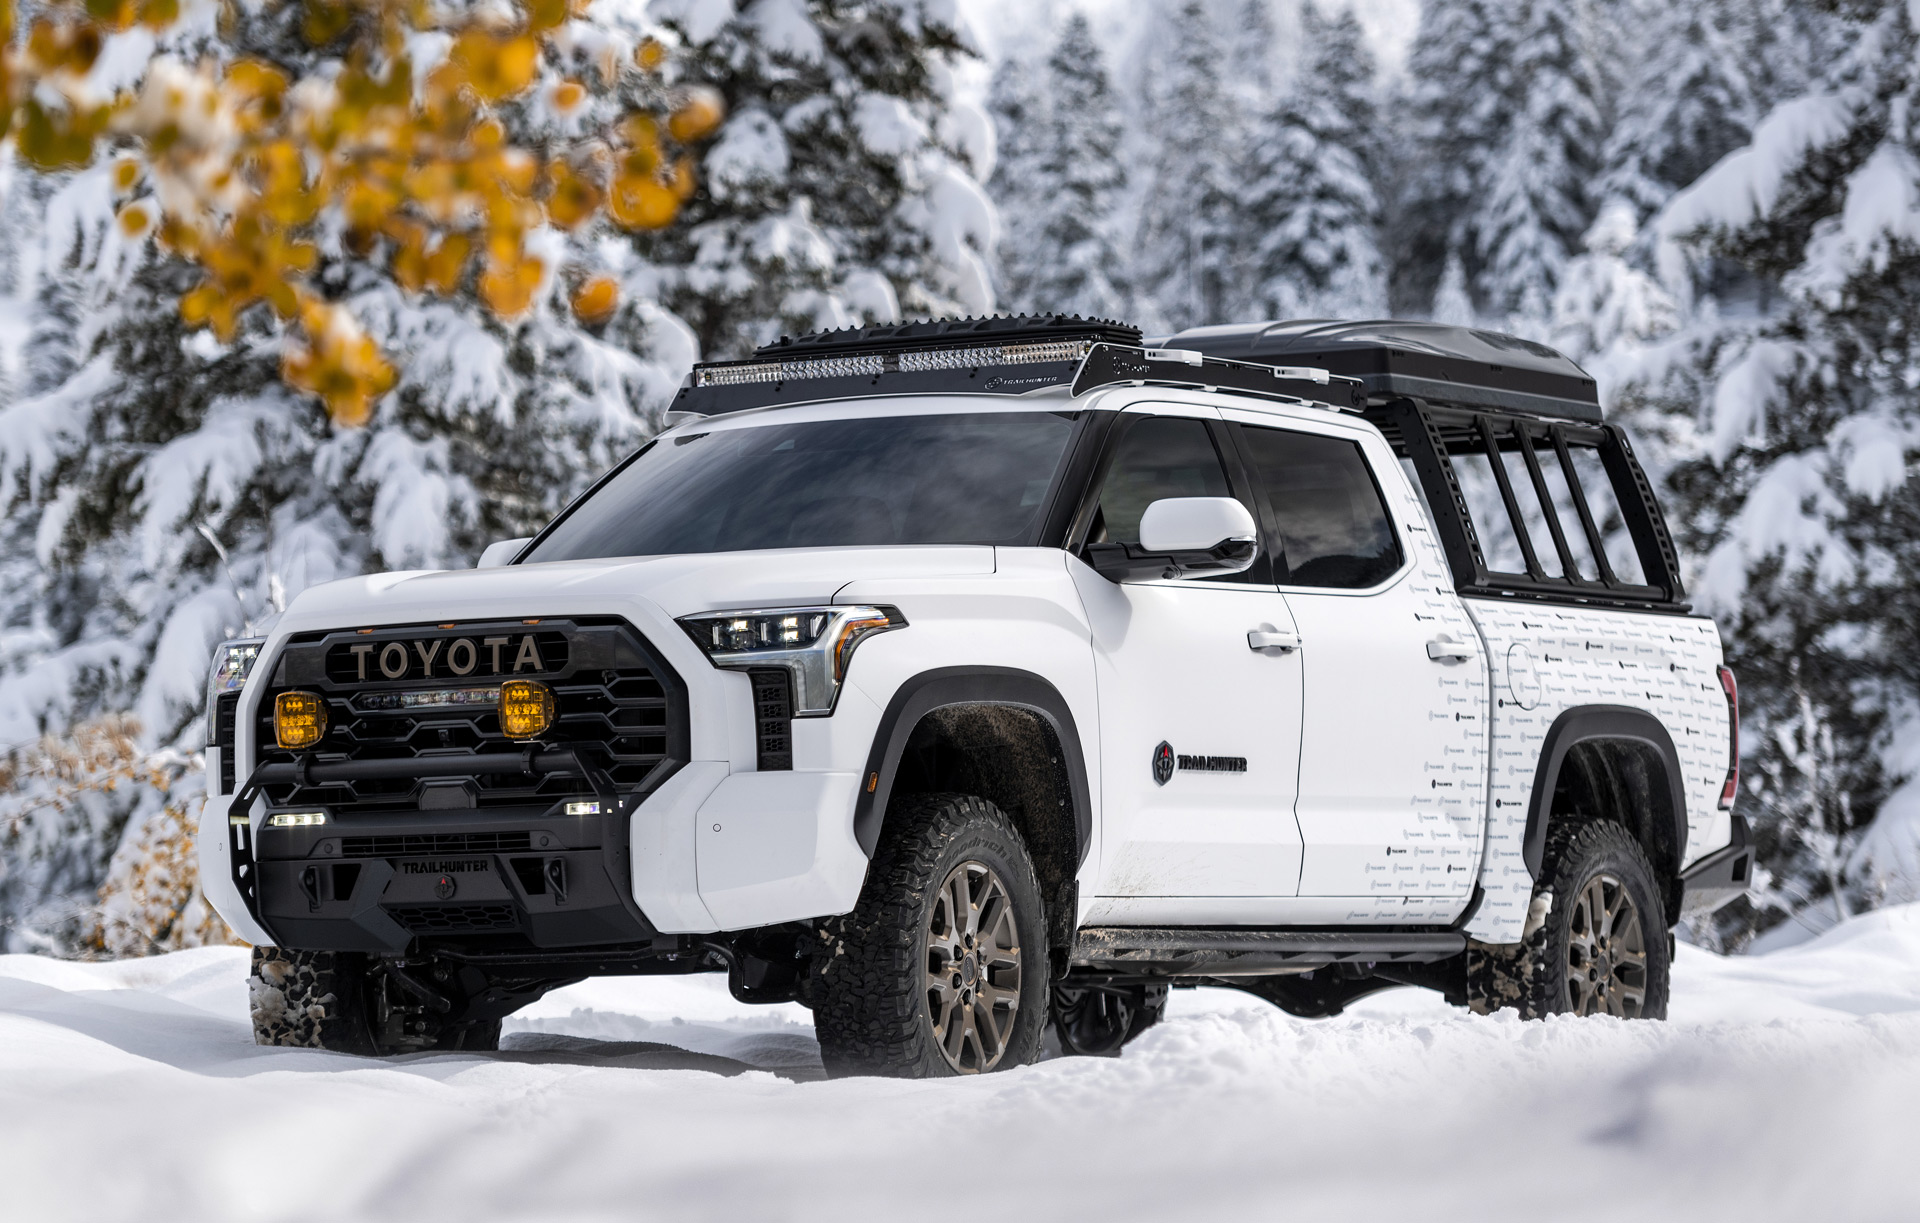 Toyota Trailhunter aims for overlanding from the factory